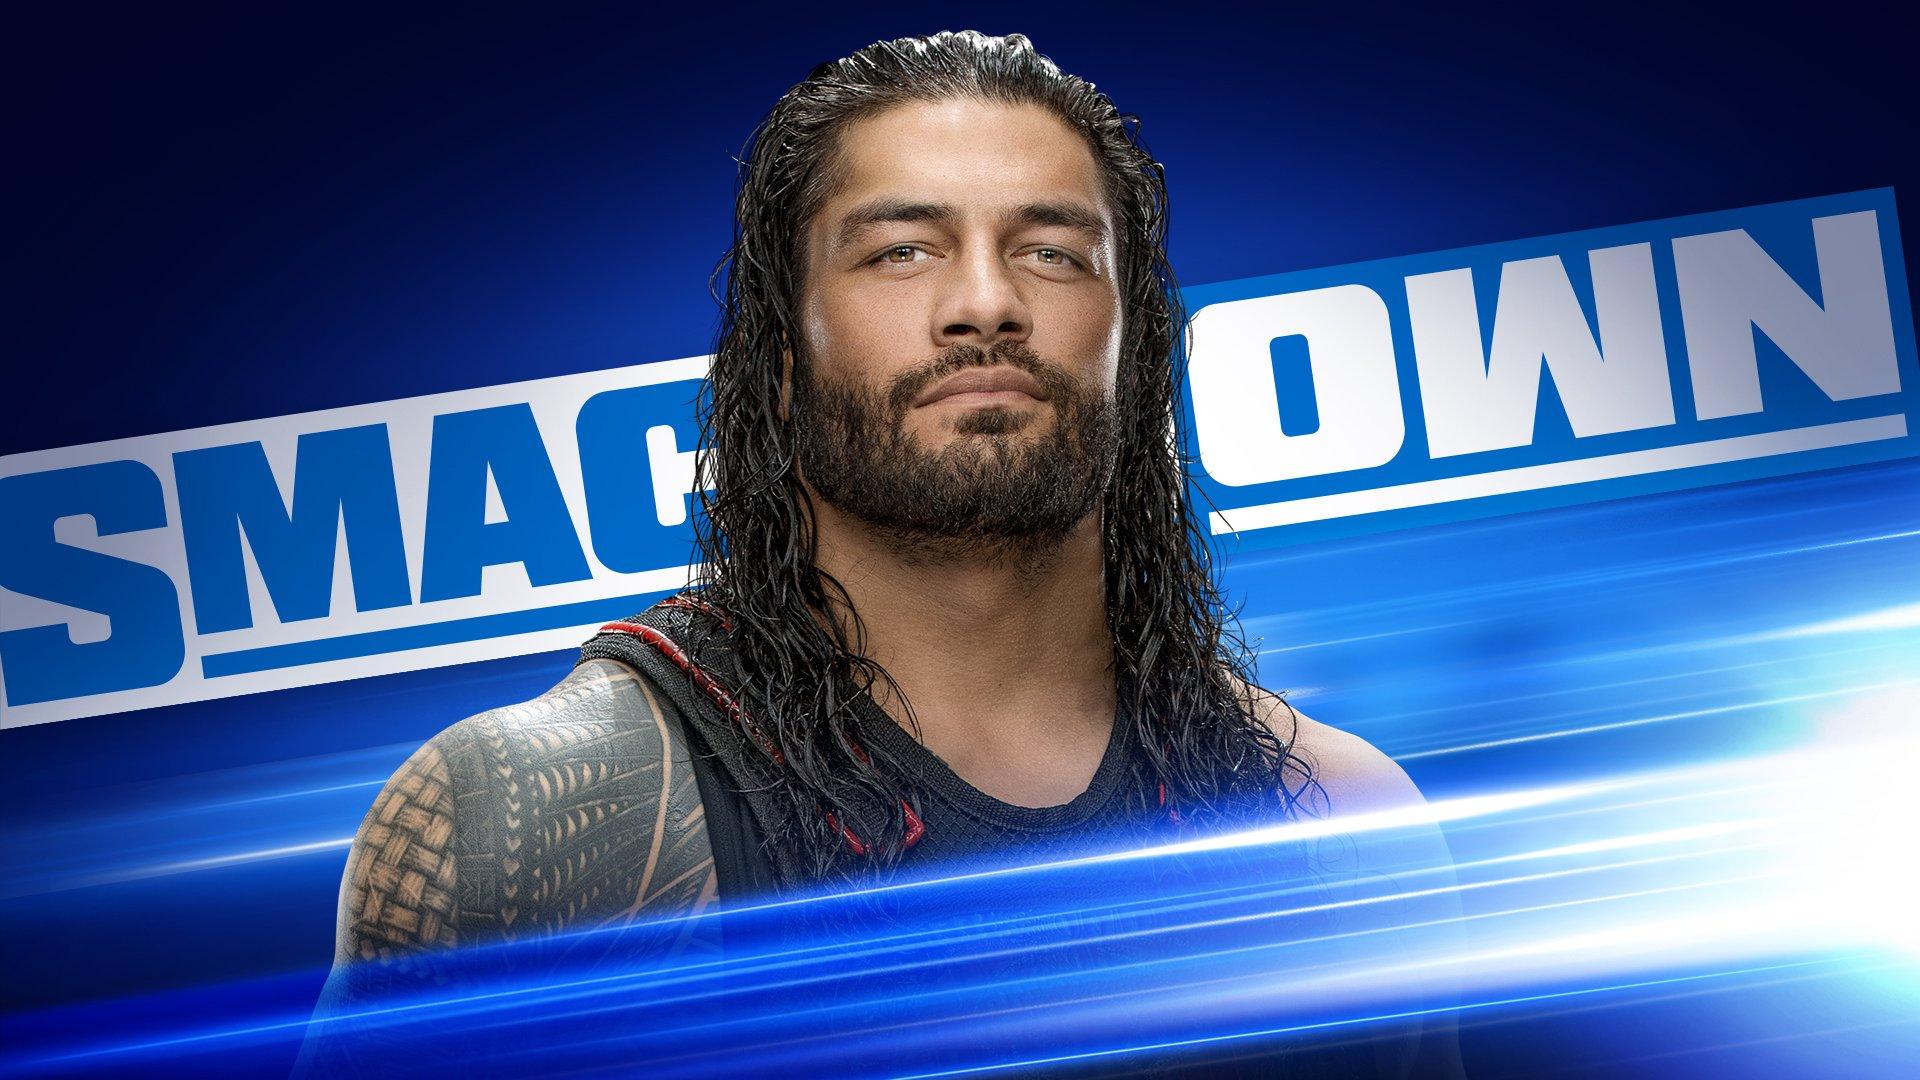 WWE SmackDown Preview, January 1st, 2021